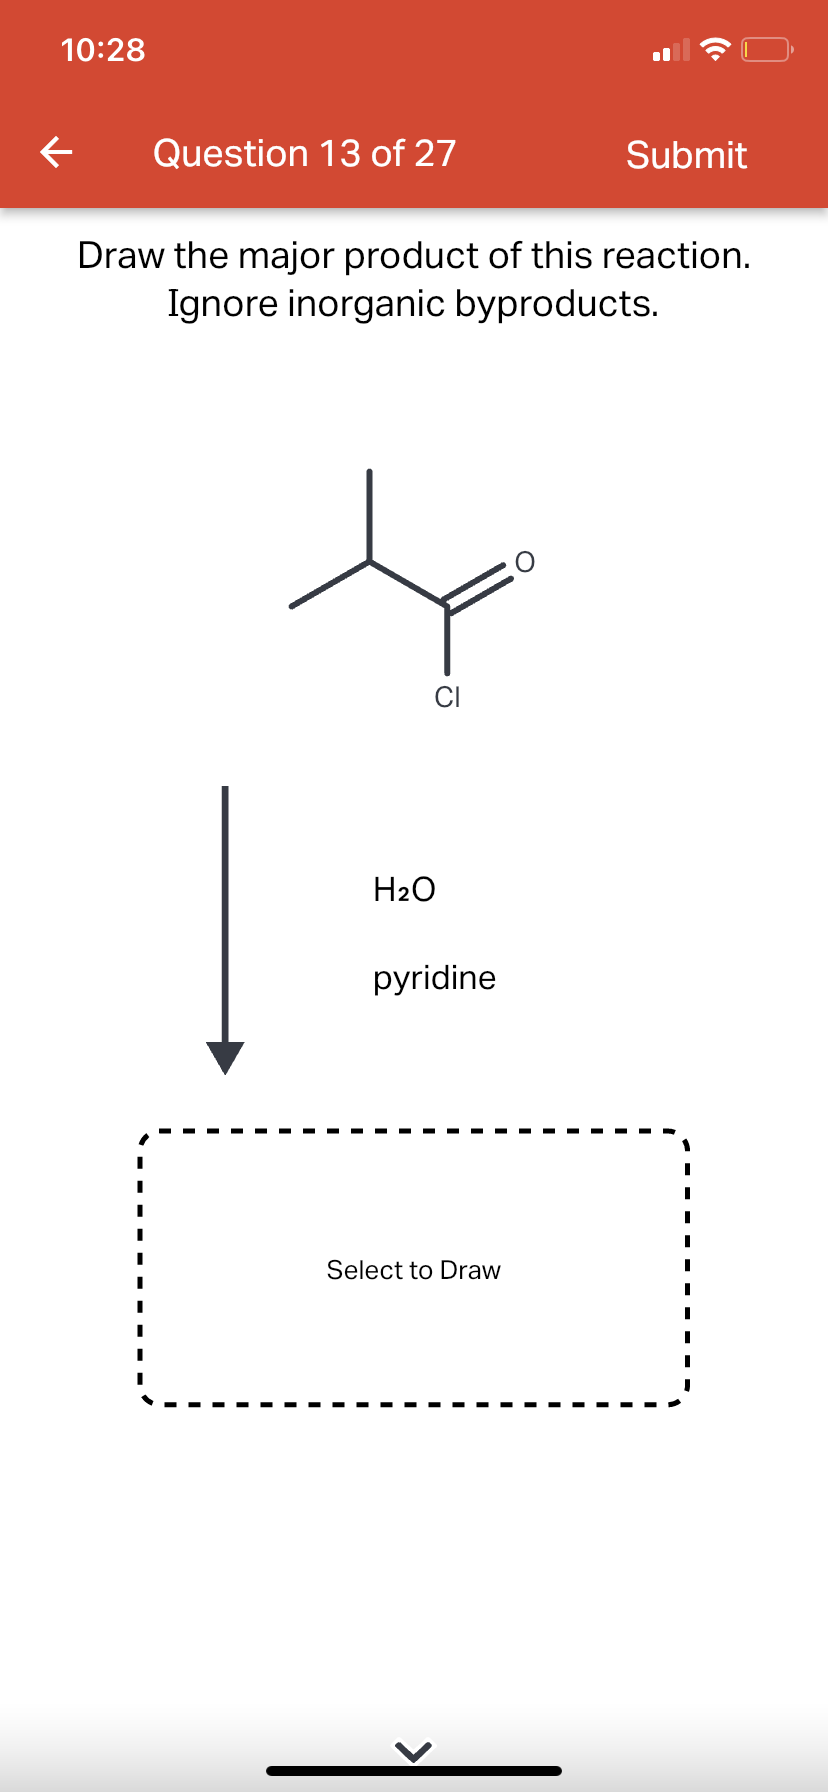 10:28
←
Question 13 of 27
Draw the major product of this reaction.
Ignore inorganic byproducts.
H₂O
pyridine
Submit
Select to Draw